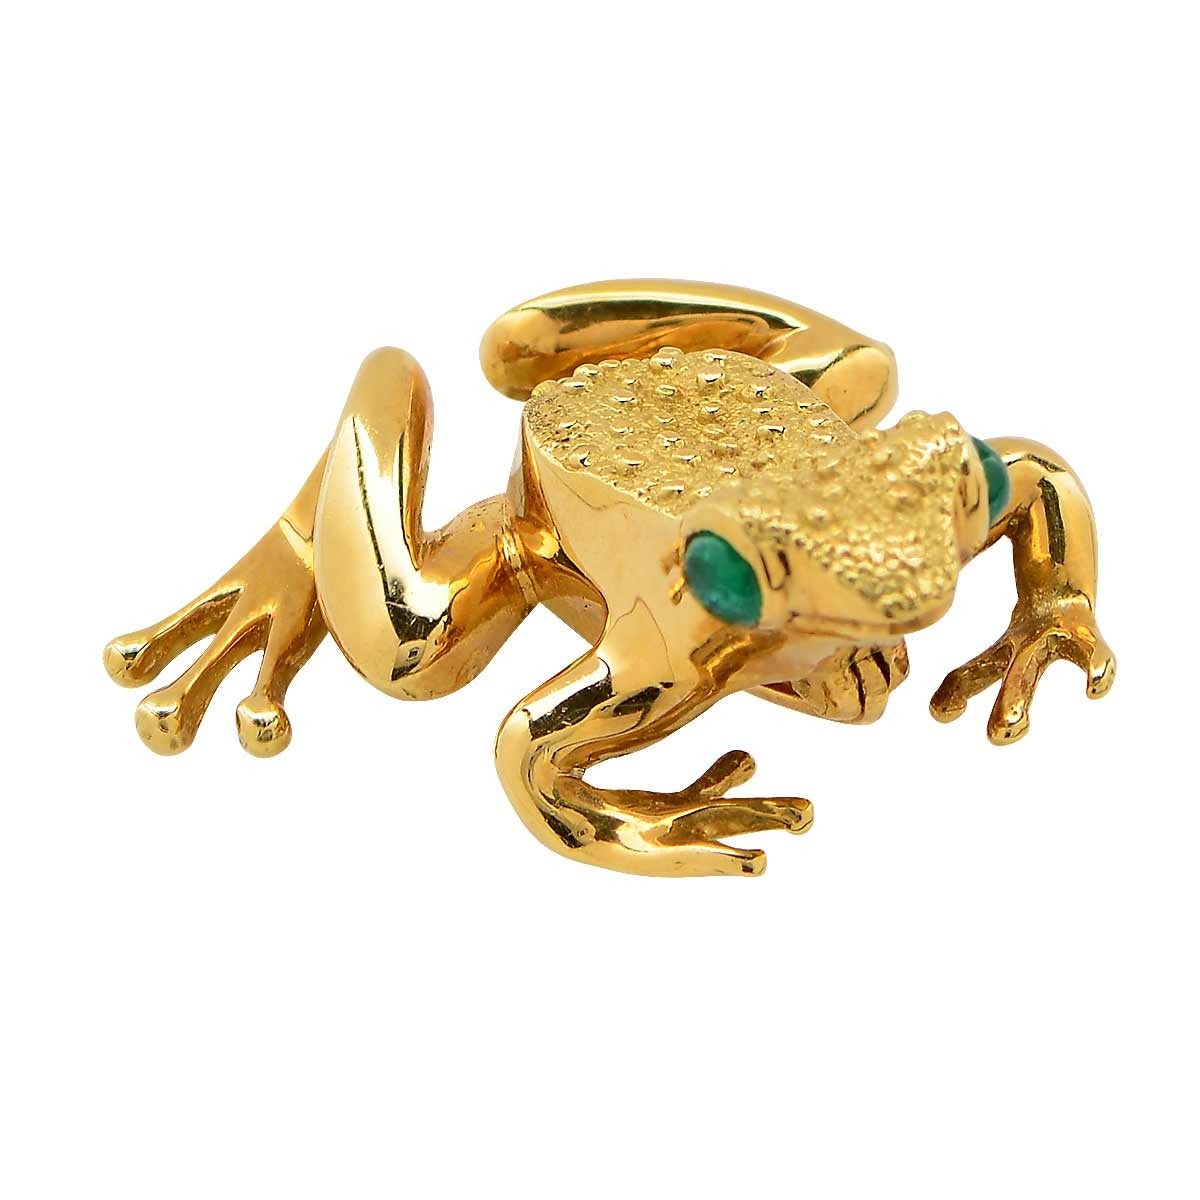 Tiffany & Co. Frog Brooch with Cabochon Emerald Eyes made from 18KT Yellow Gold.